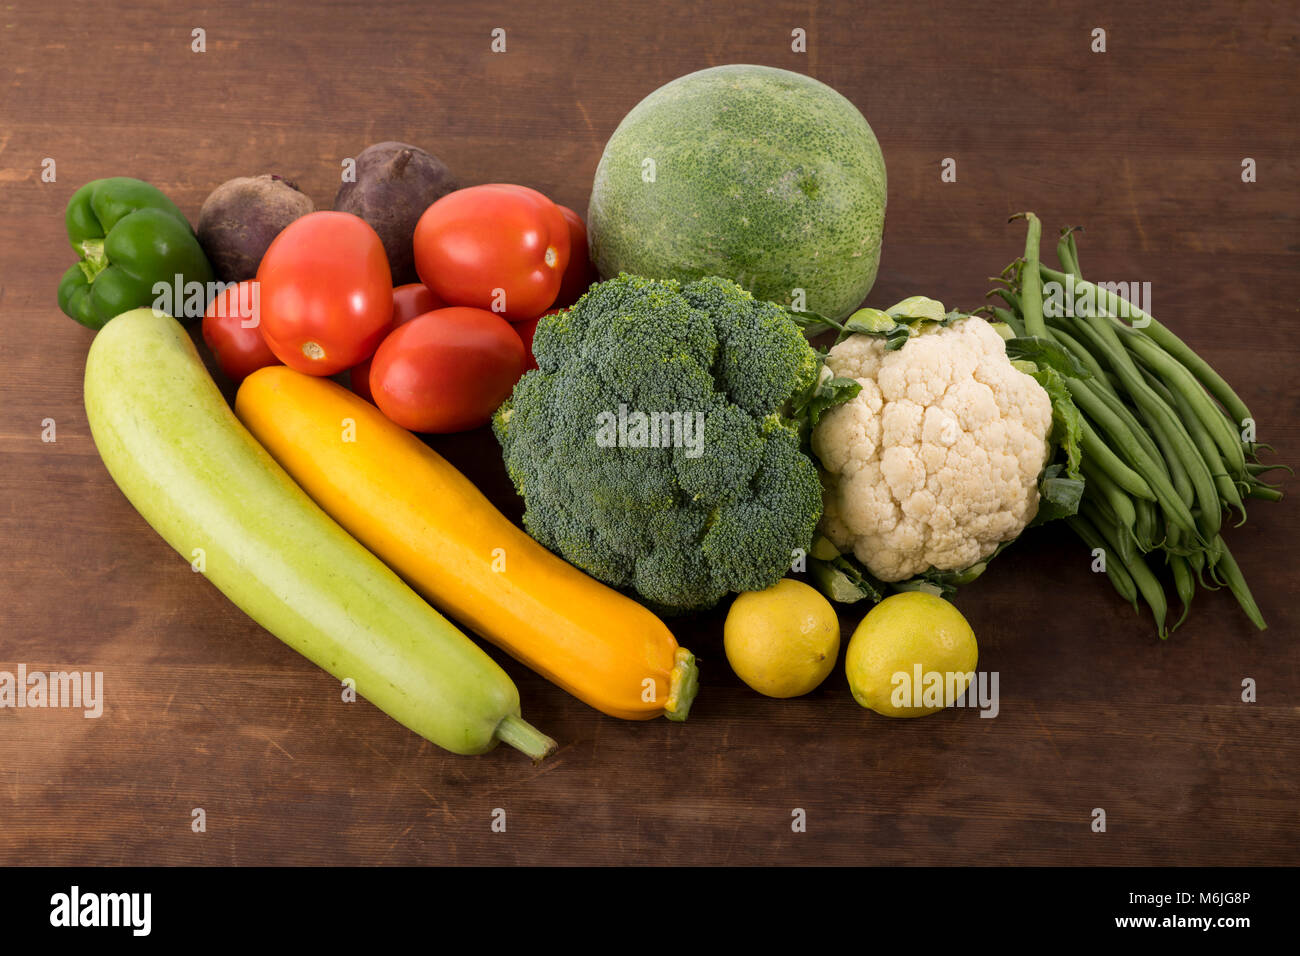 Vegetable:  Close up of  Mixed Vegetable Shot in Studio Isolated on Wooden Background Stock Photo